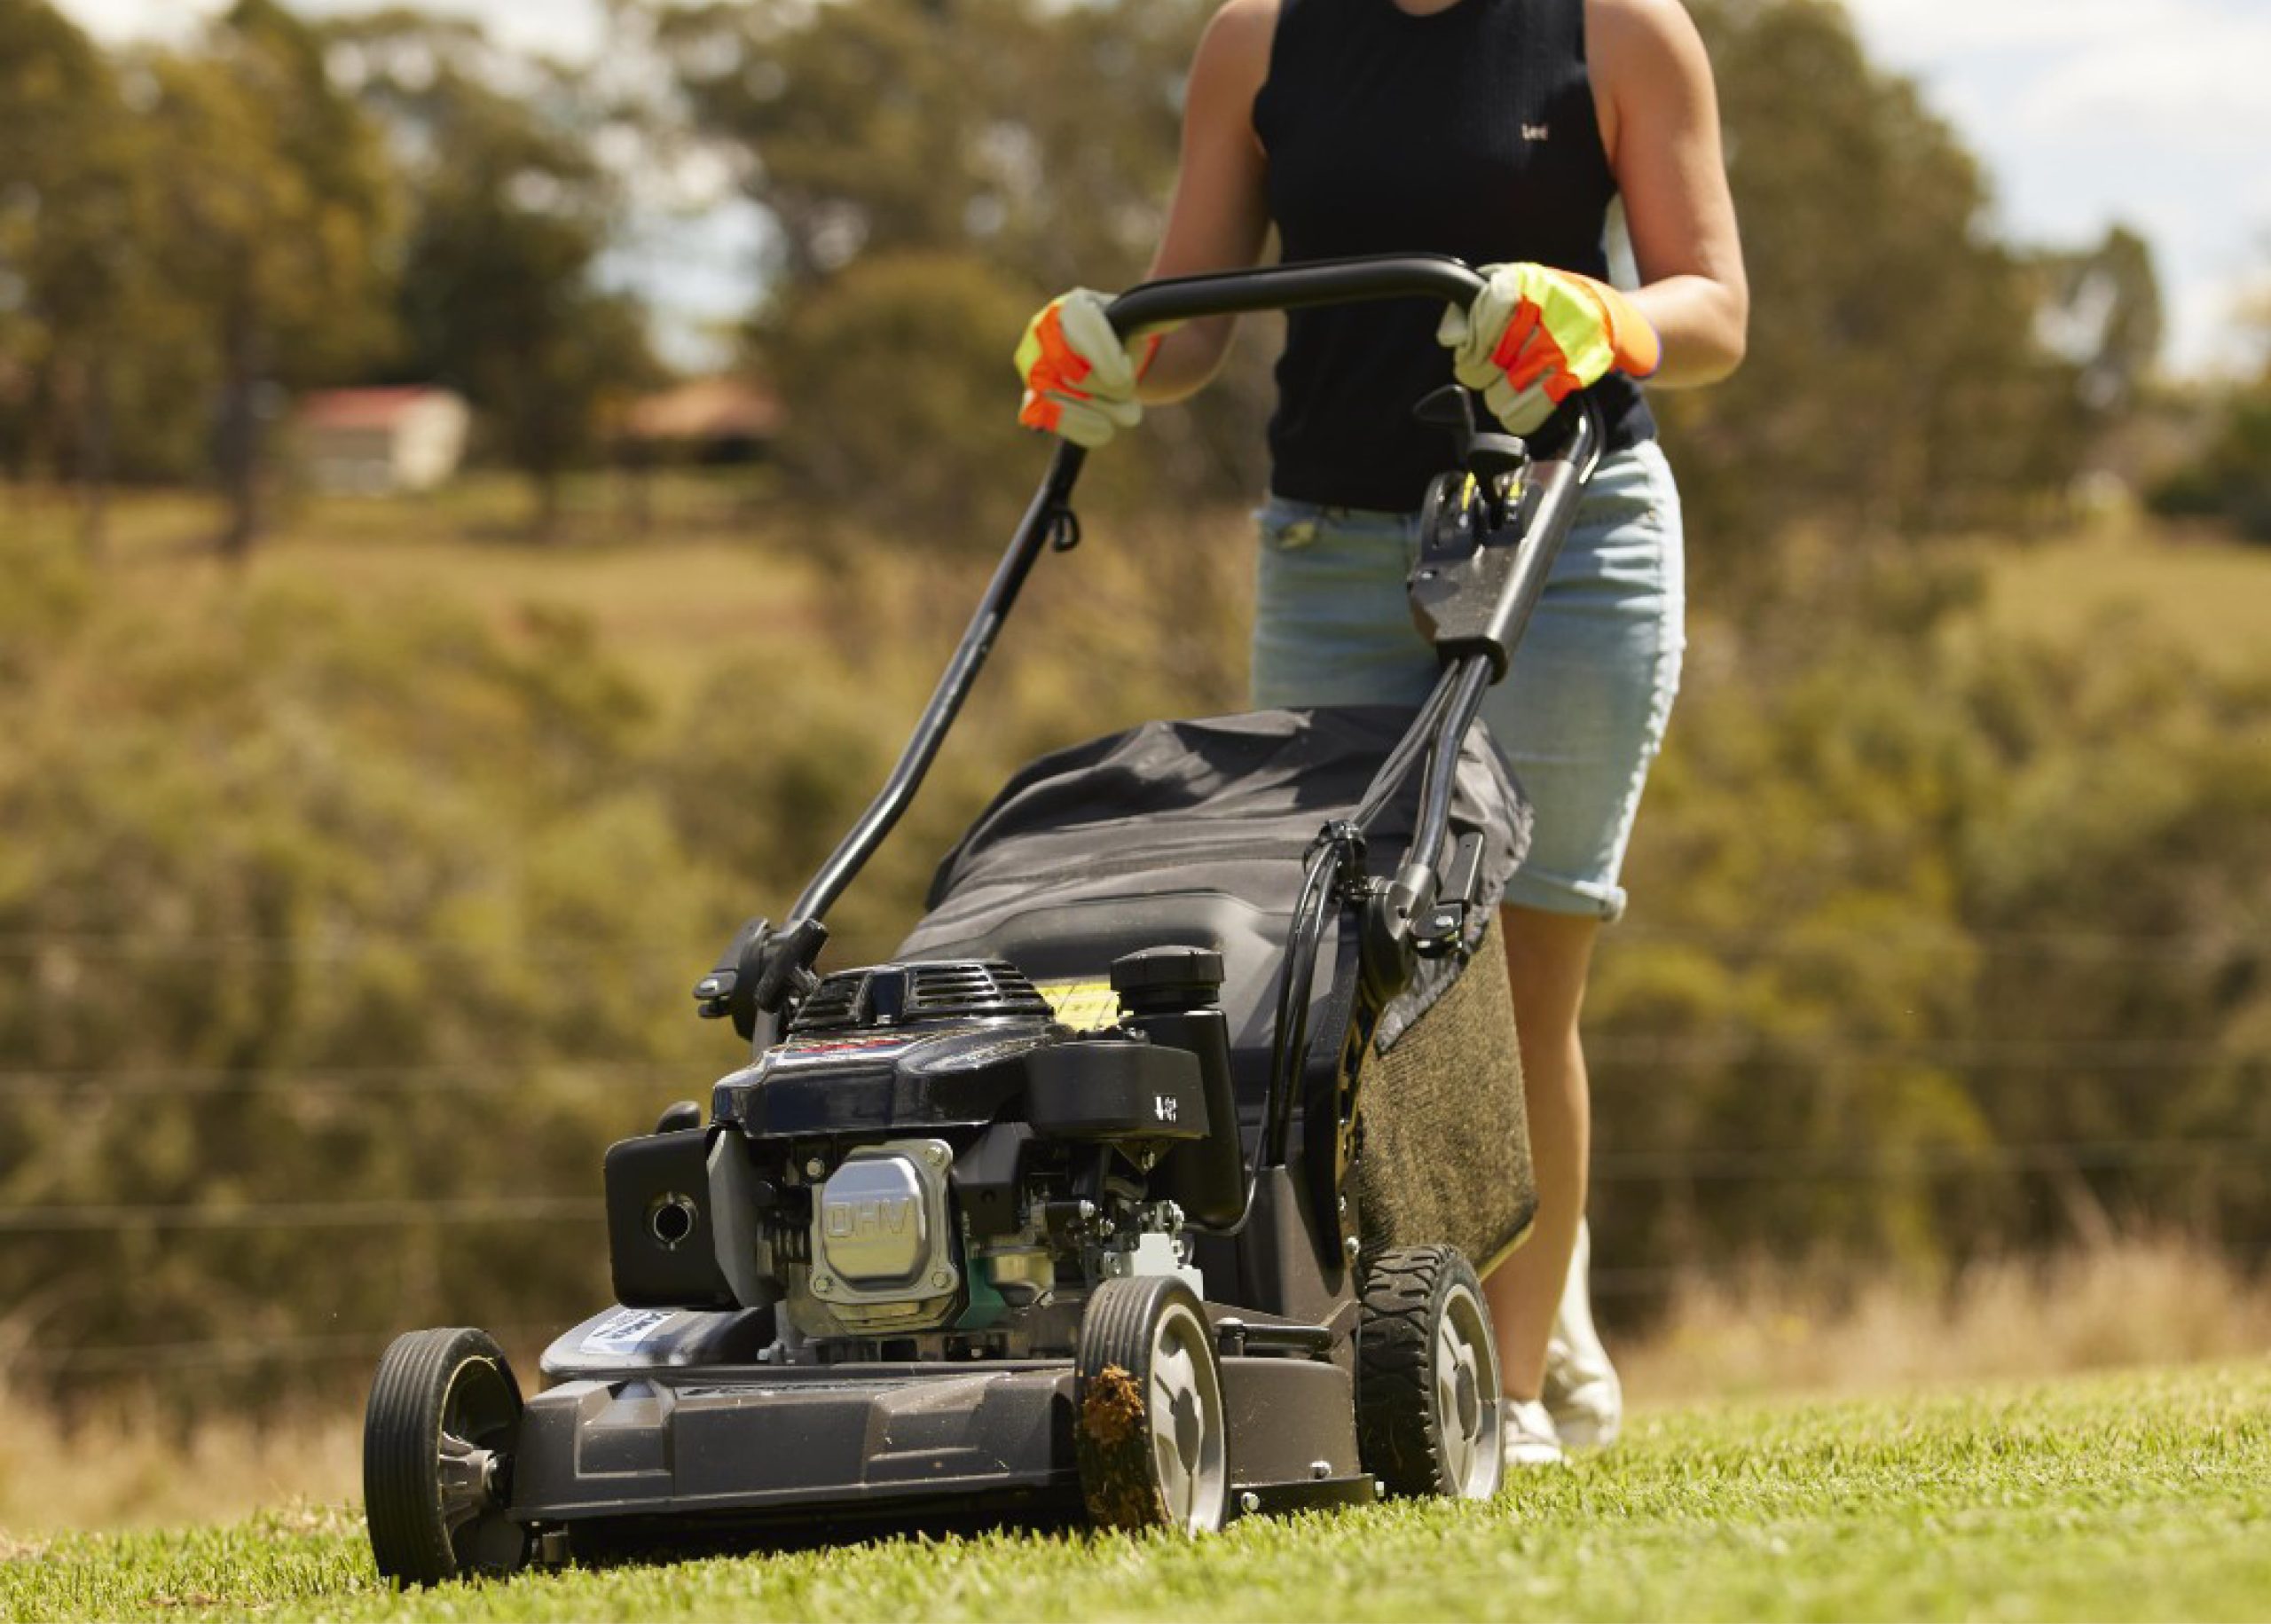 A look at Rotary vs Reel mowers - Lawn Solutions Australia